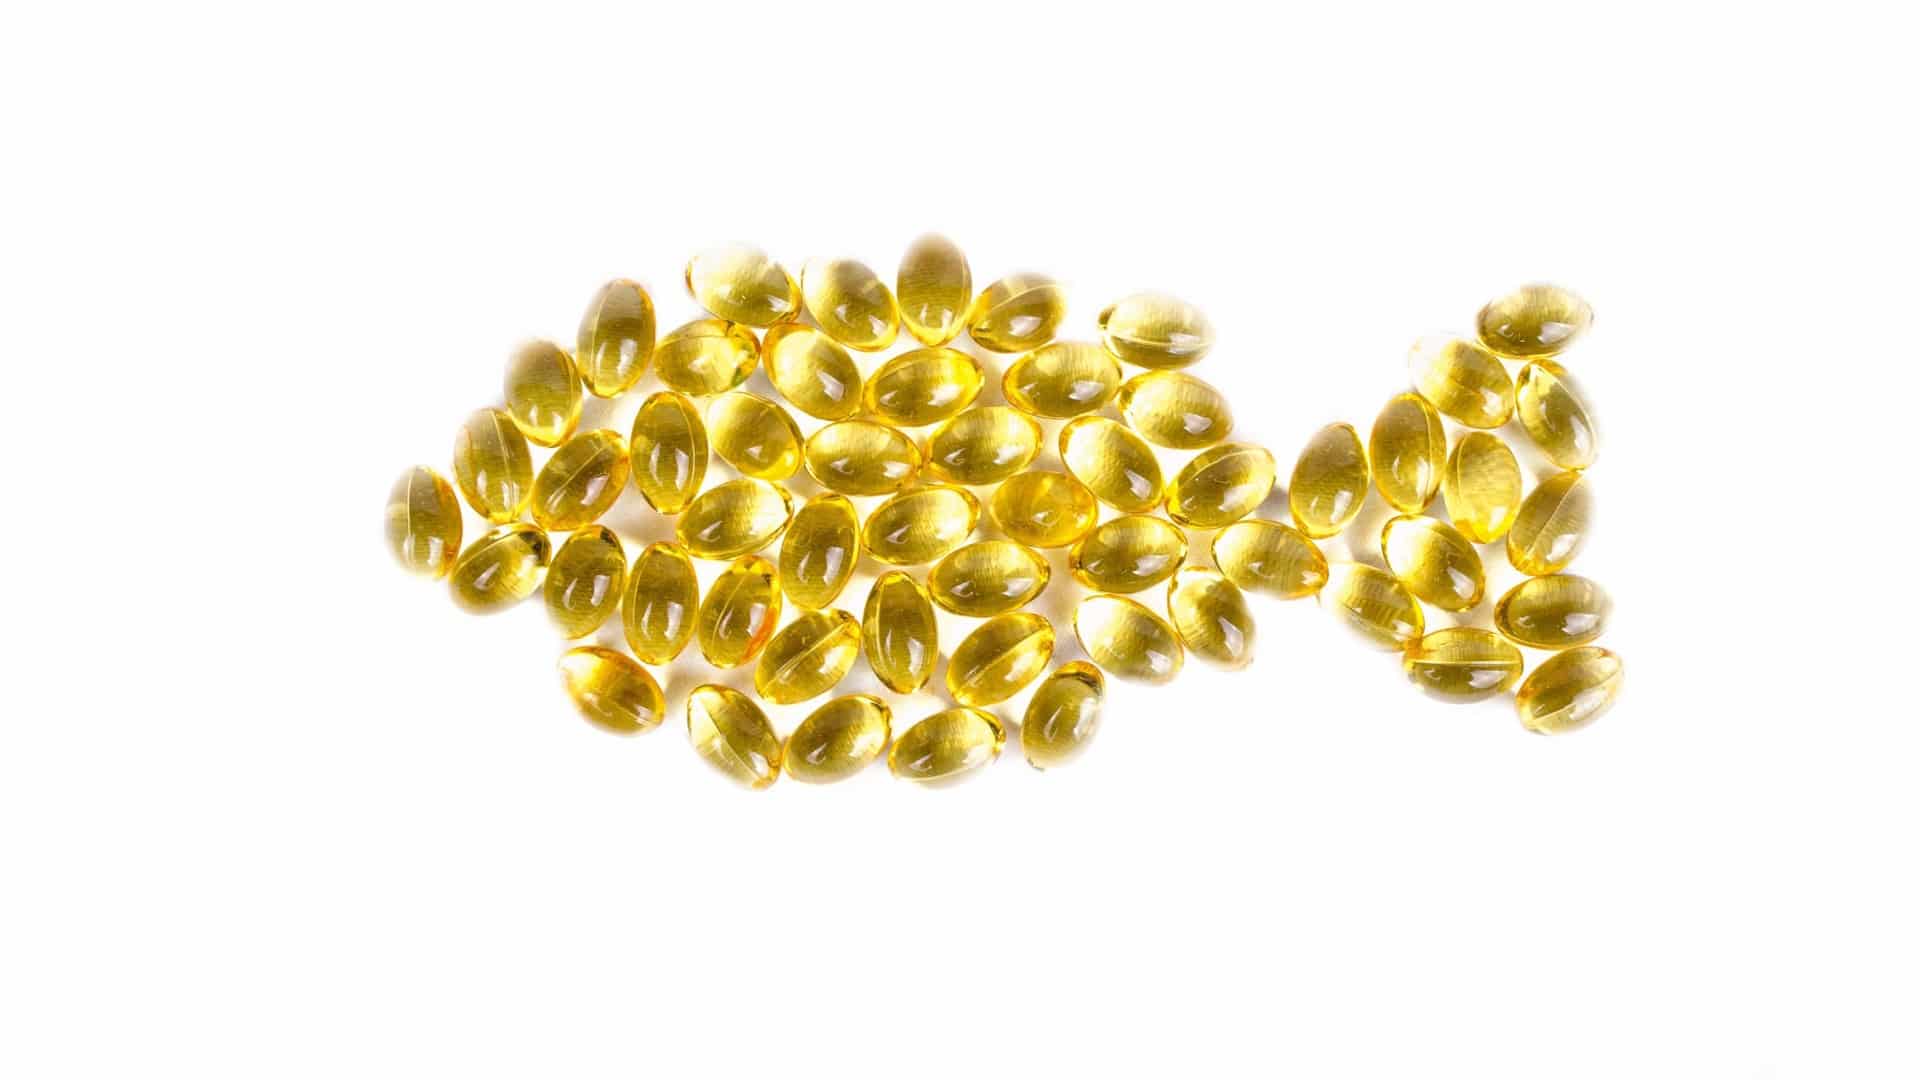 Should We Take EPA and DHA Omega-3 For Our Heart?